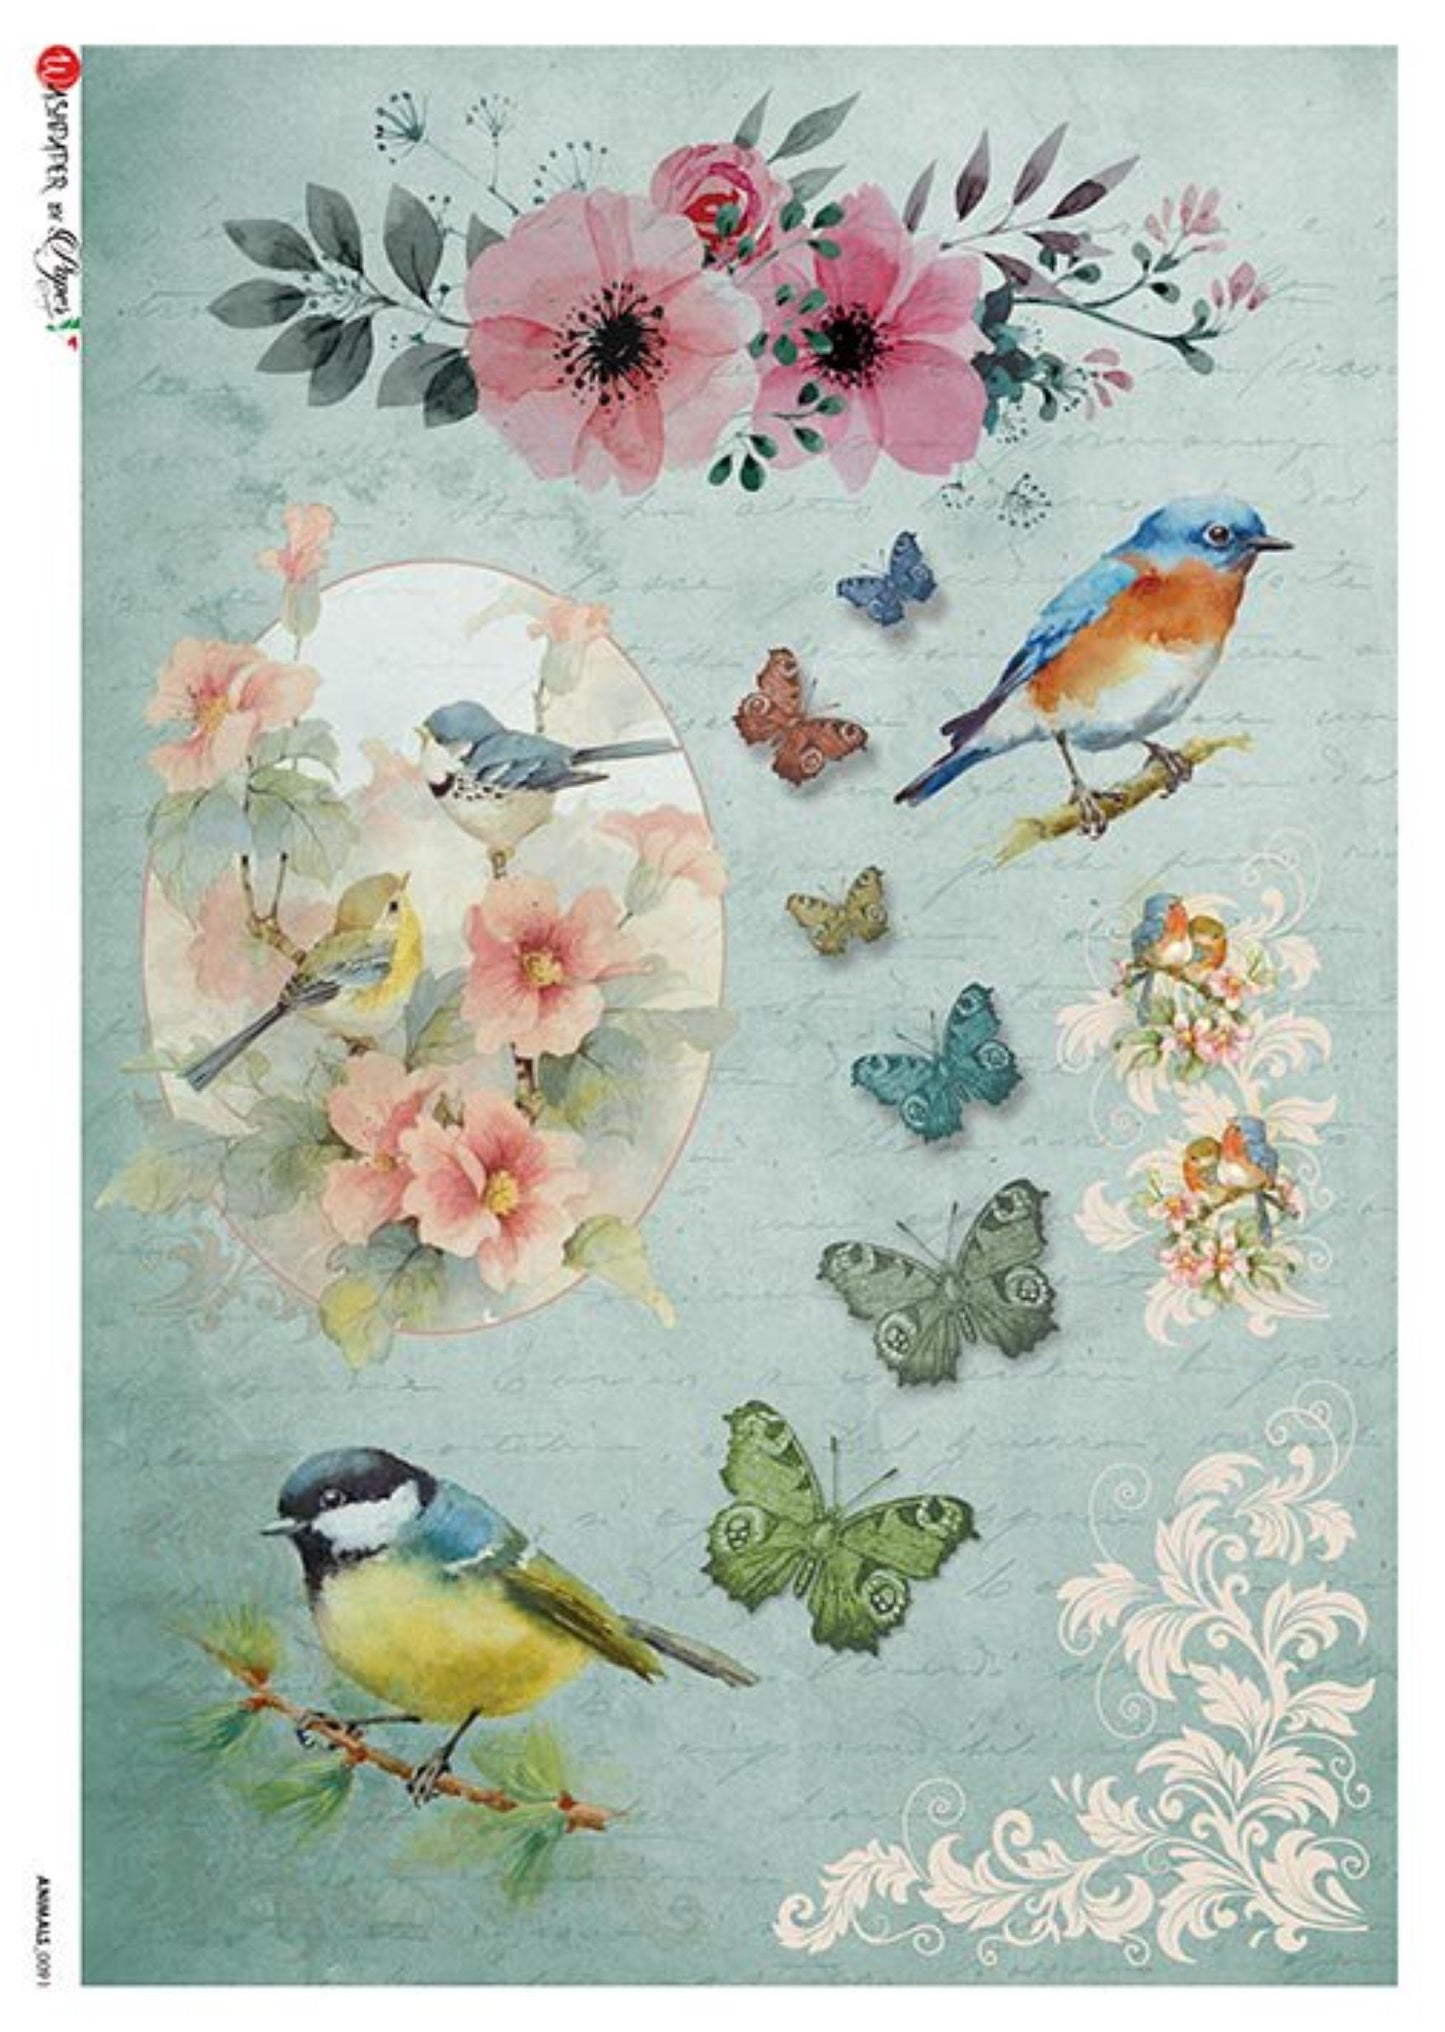 Paper Designs Animals 0091 Rice Paper Birds and Butterflies, flowers, PD ANIMALS 0091-A4 Designed in Italy, decoupage